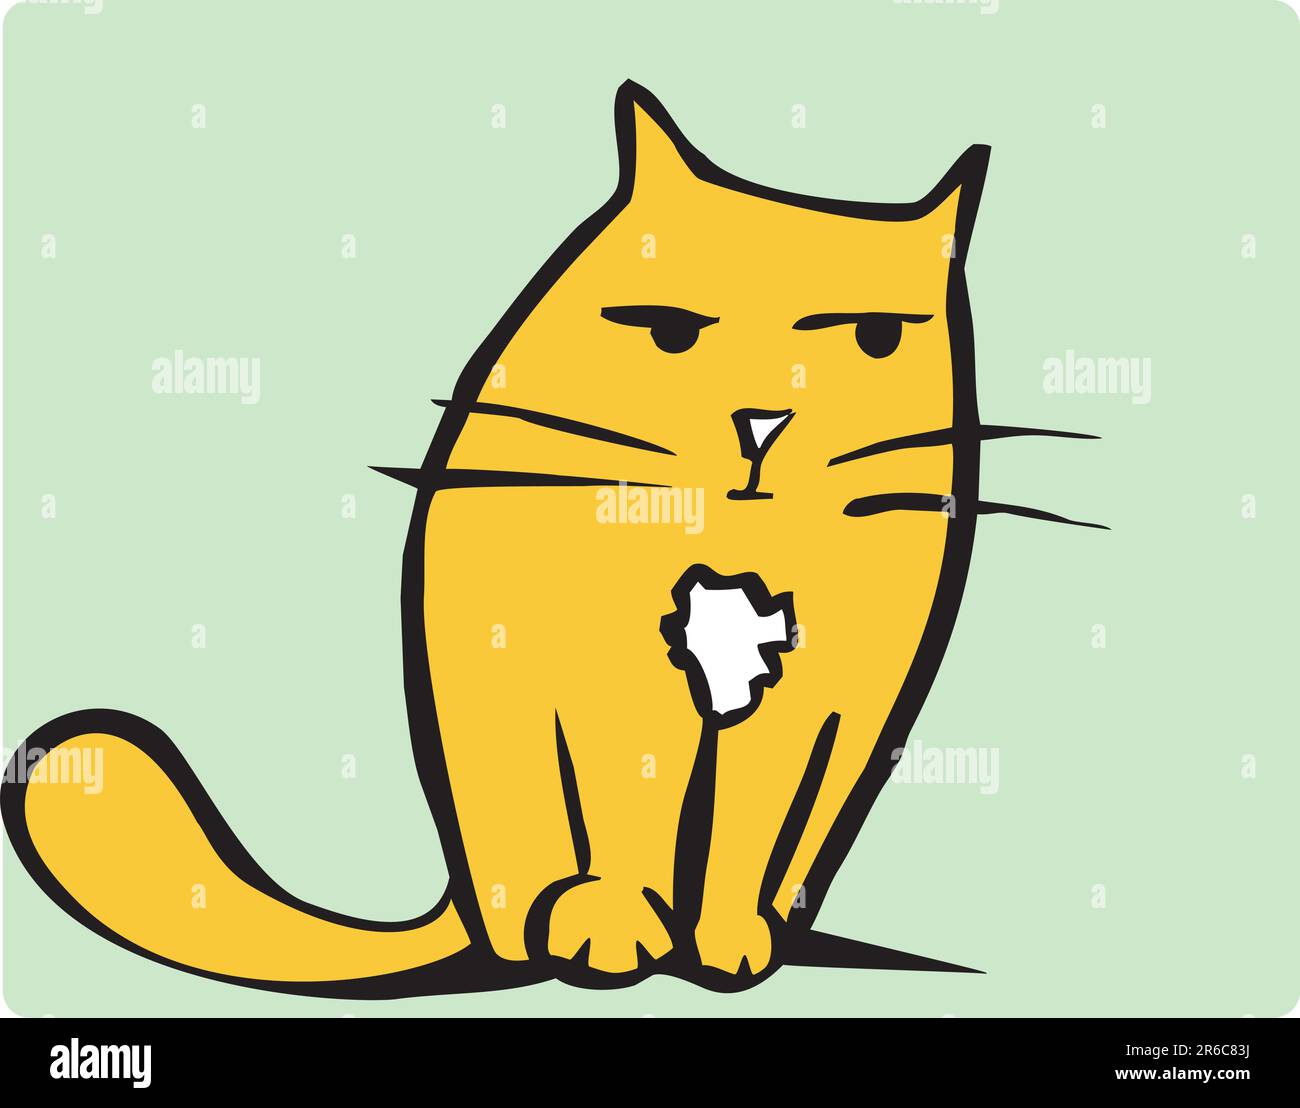 Simple image of an orange cat sitting and brooding. Add word balloons or use as spot illustration. Stock Vector